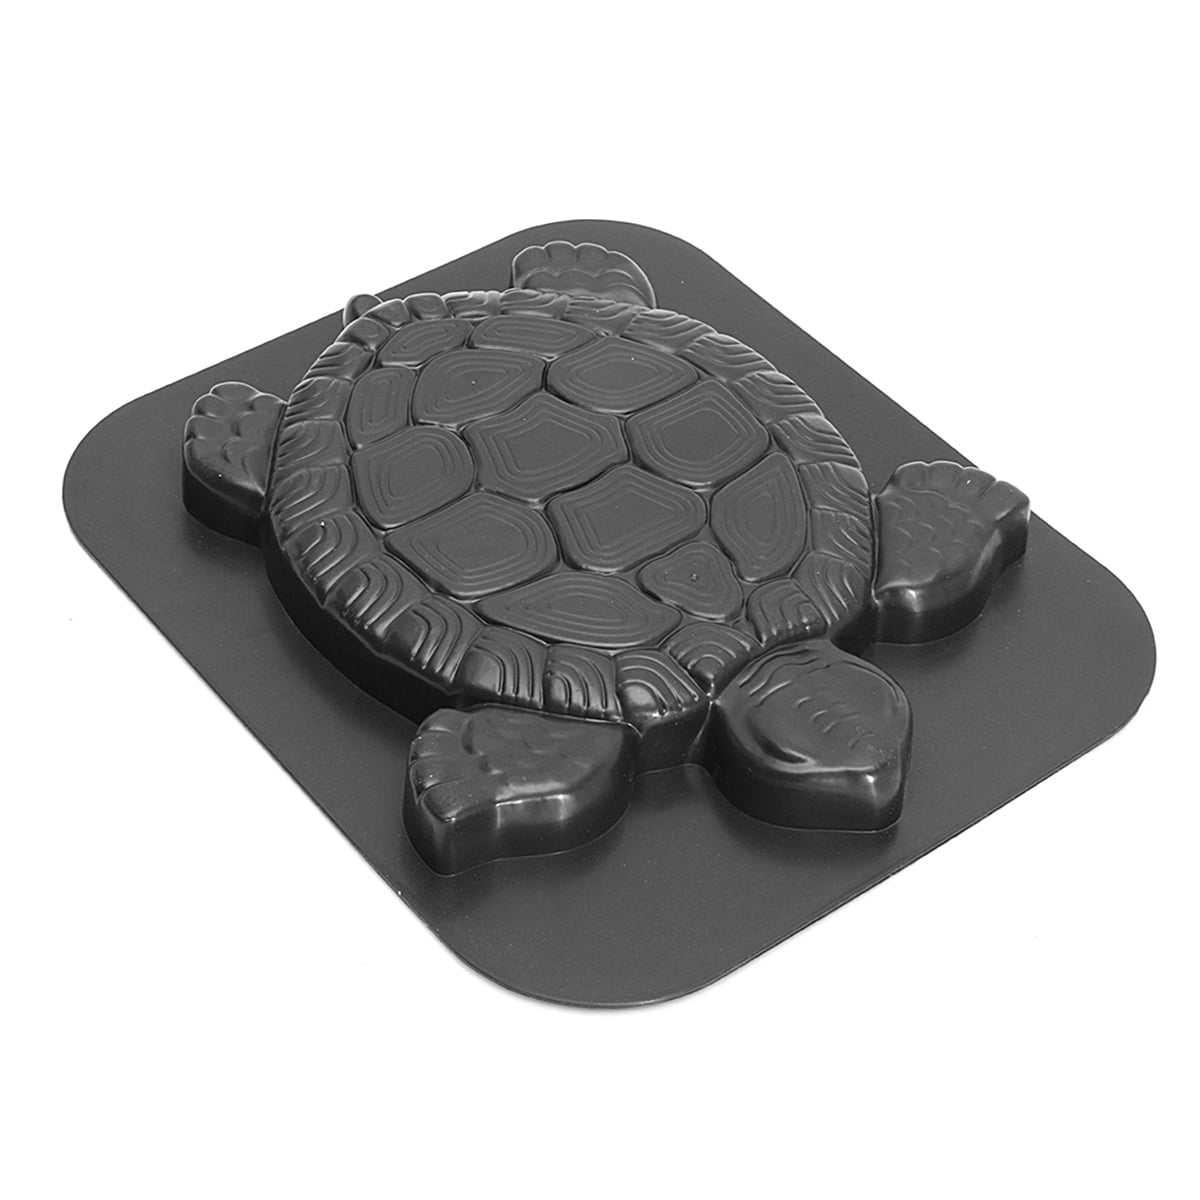 Shell stepping stone plastic mold 12" x 1" thick  plaster concrete mould 